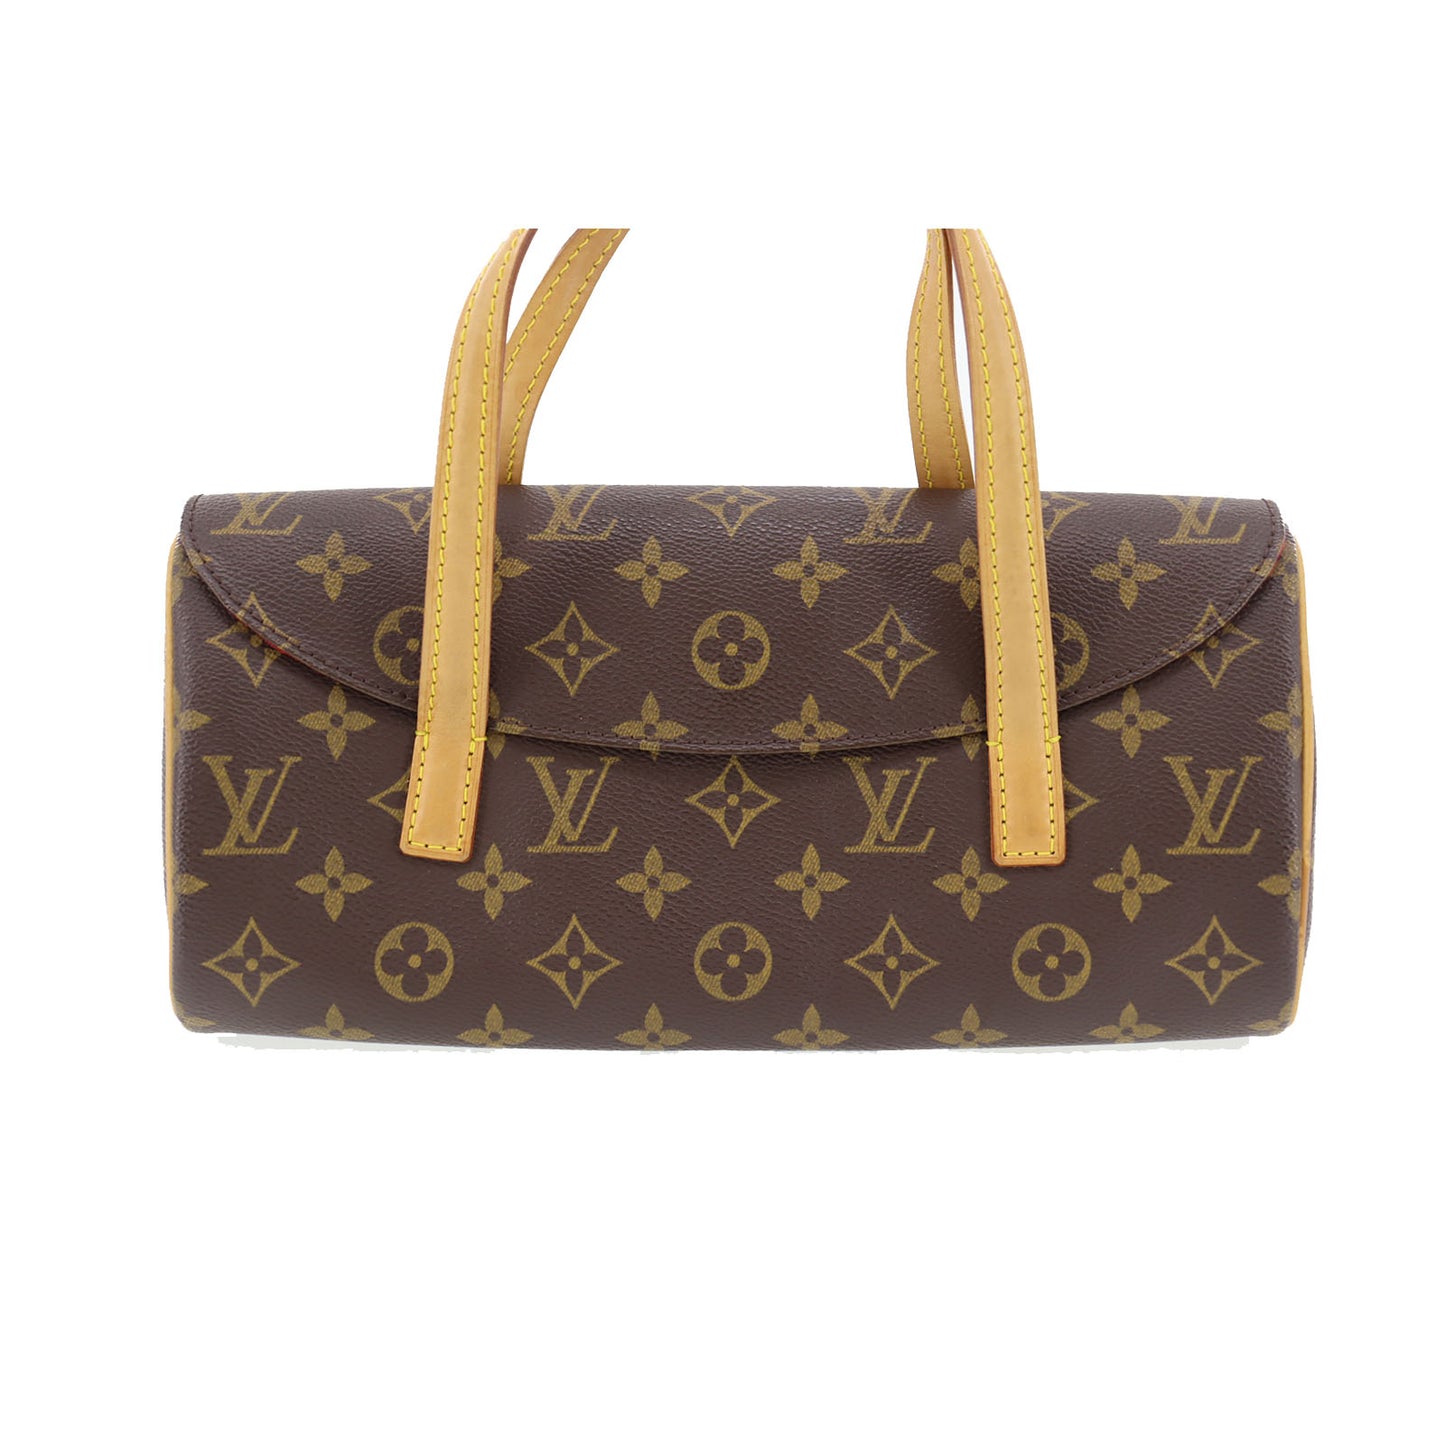 Authentic pre-owned Louis Vuitton Sonatine